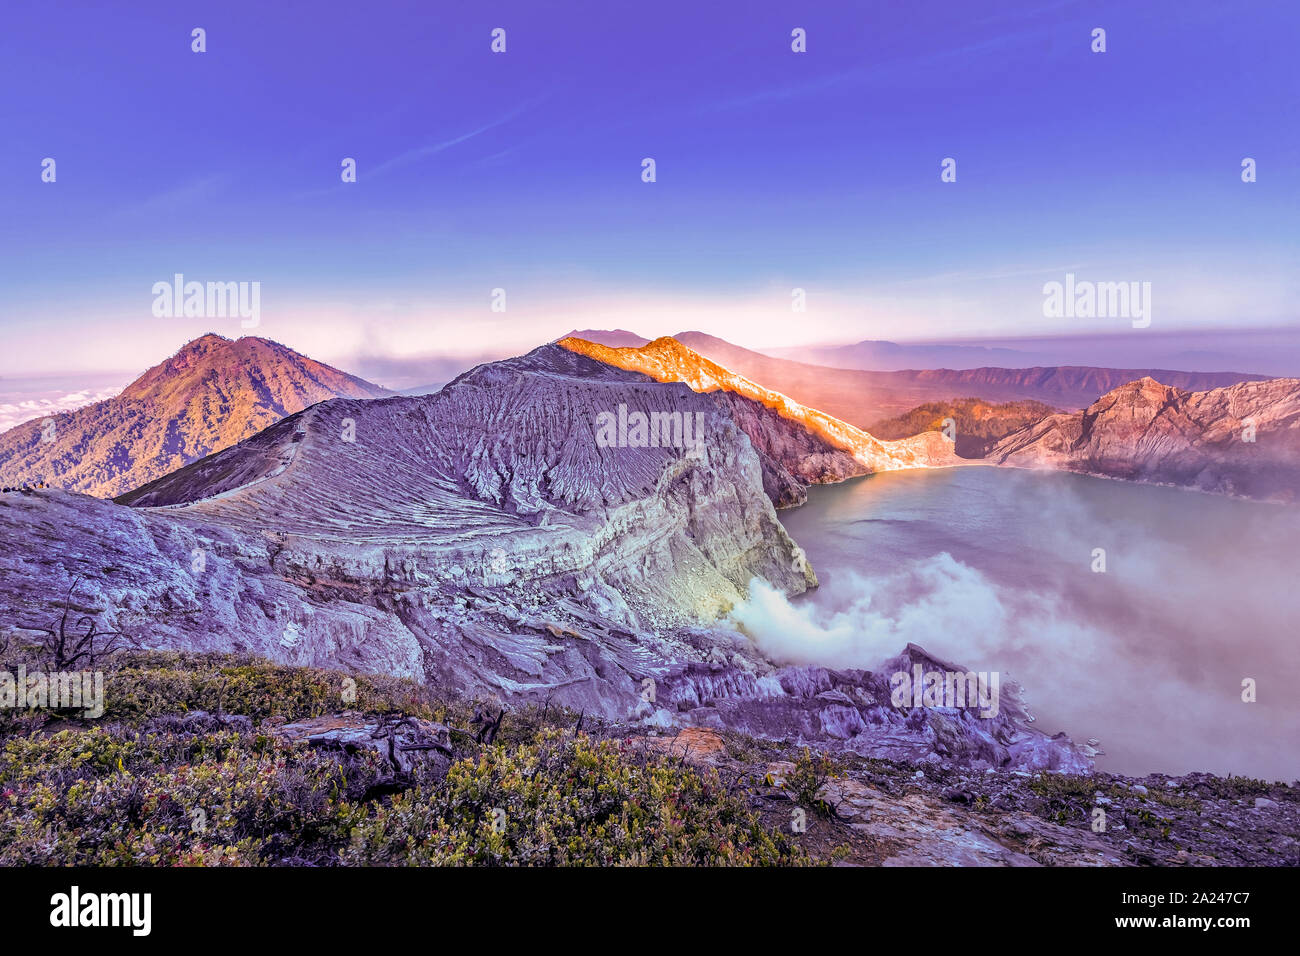 Aerial View of Kawah Ijen - Early in the Morning. A group of composite volcanoes in the Banyuwangi Regency of East Java, Indonesia Stock Photo